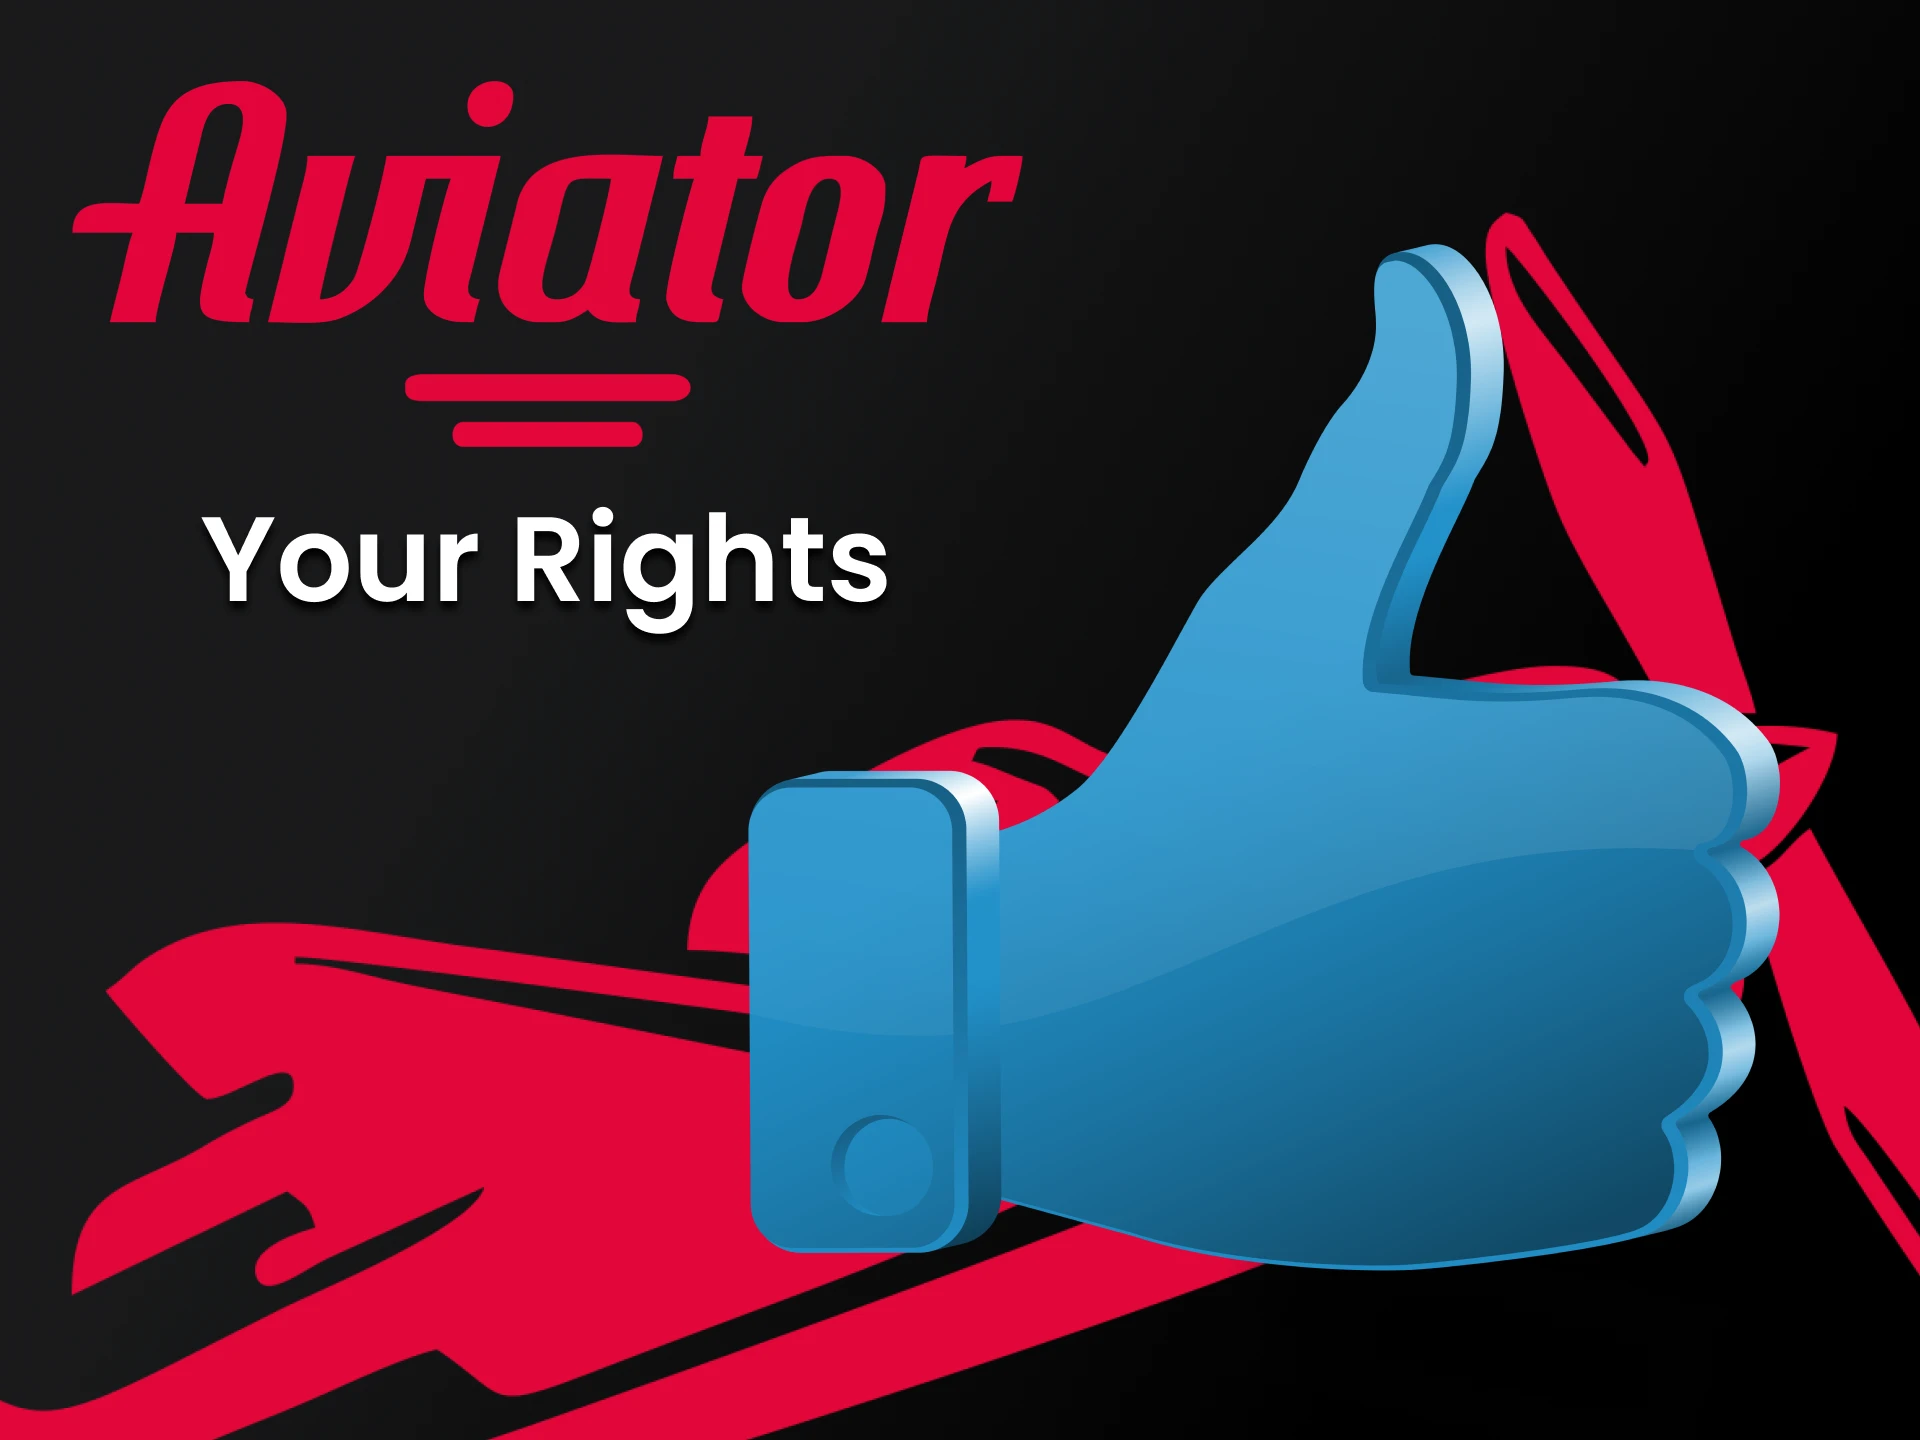 We will tell you about your rights on the Aviator website.